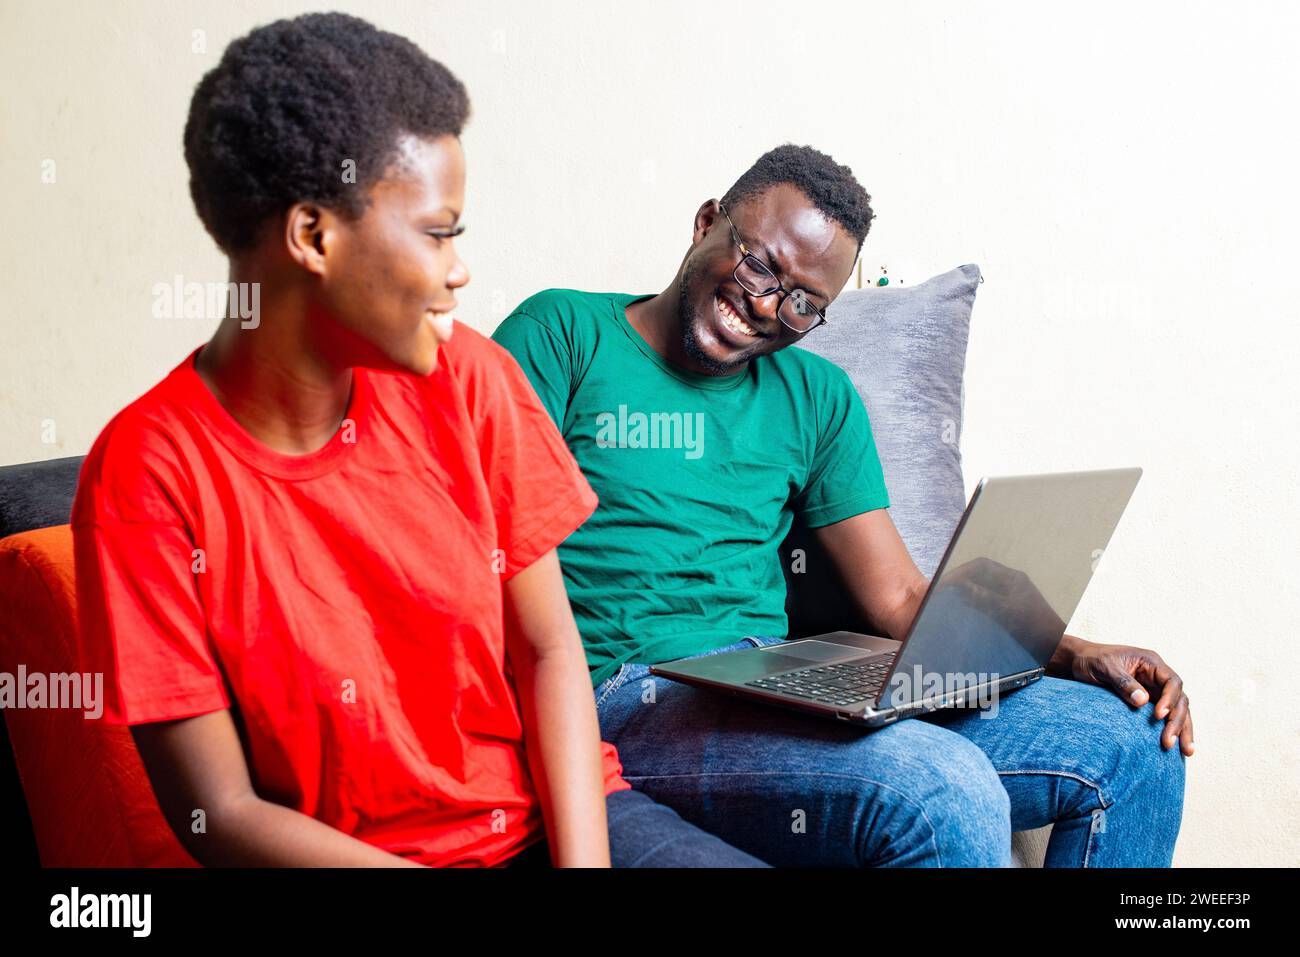 beautiful young happy couple sitting together on sofa at home with laptop while smiling. Stock Photo